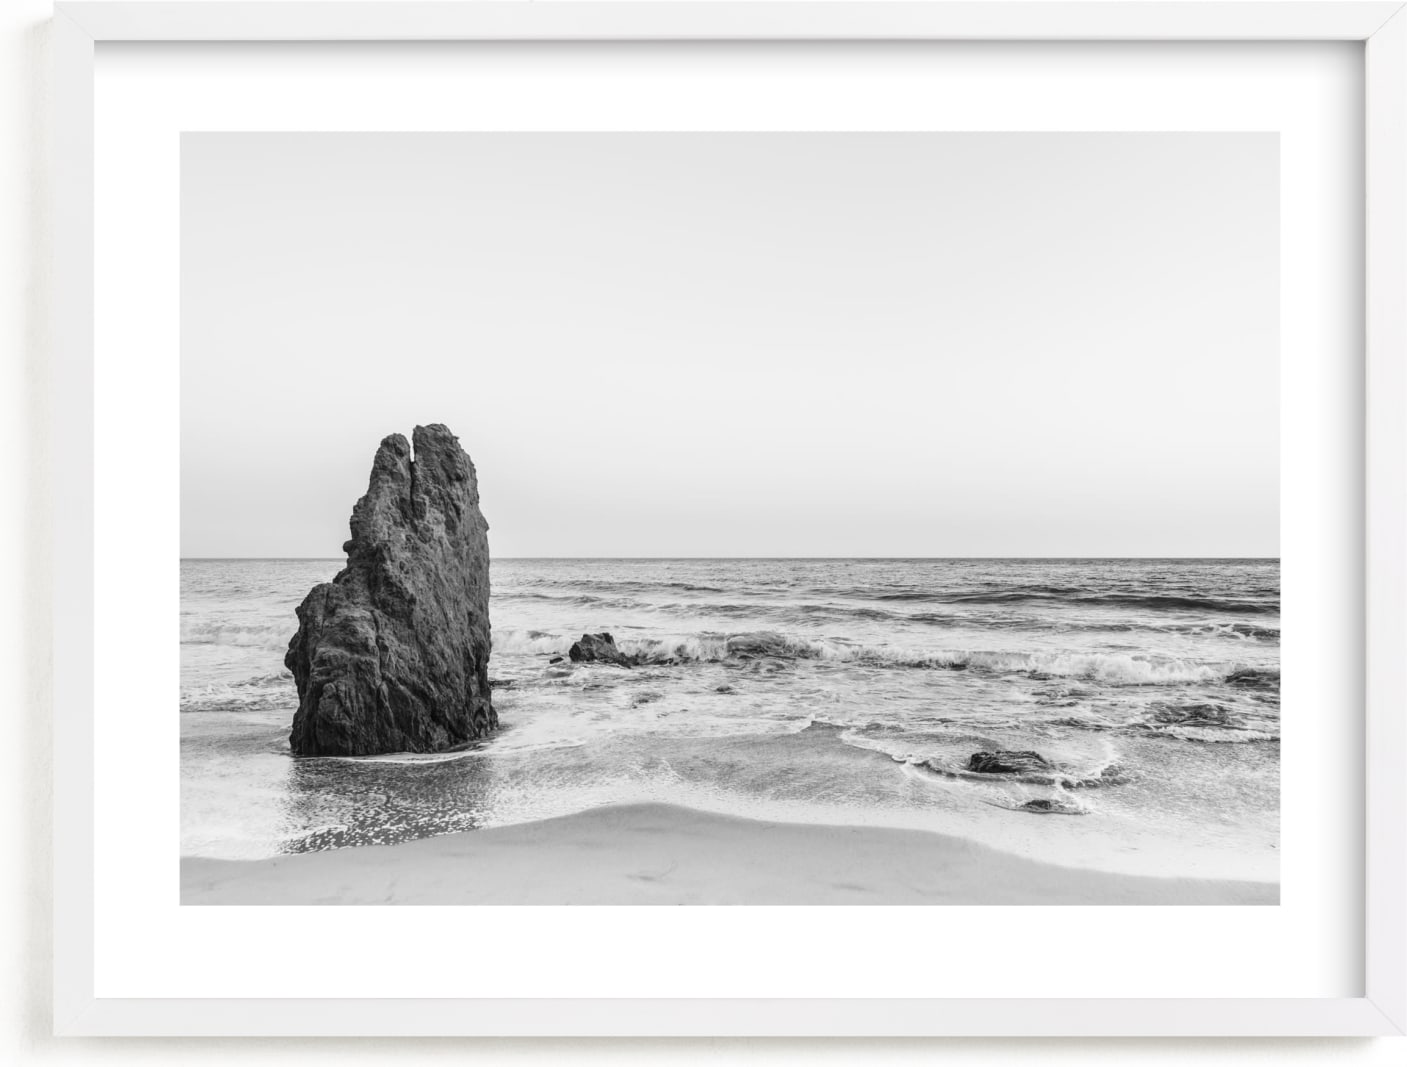 This is a black and white art by Kamala Nahas called Malibu View No. 2.